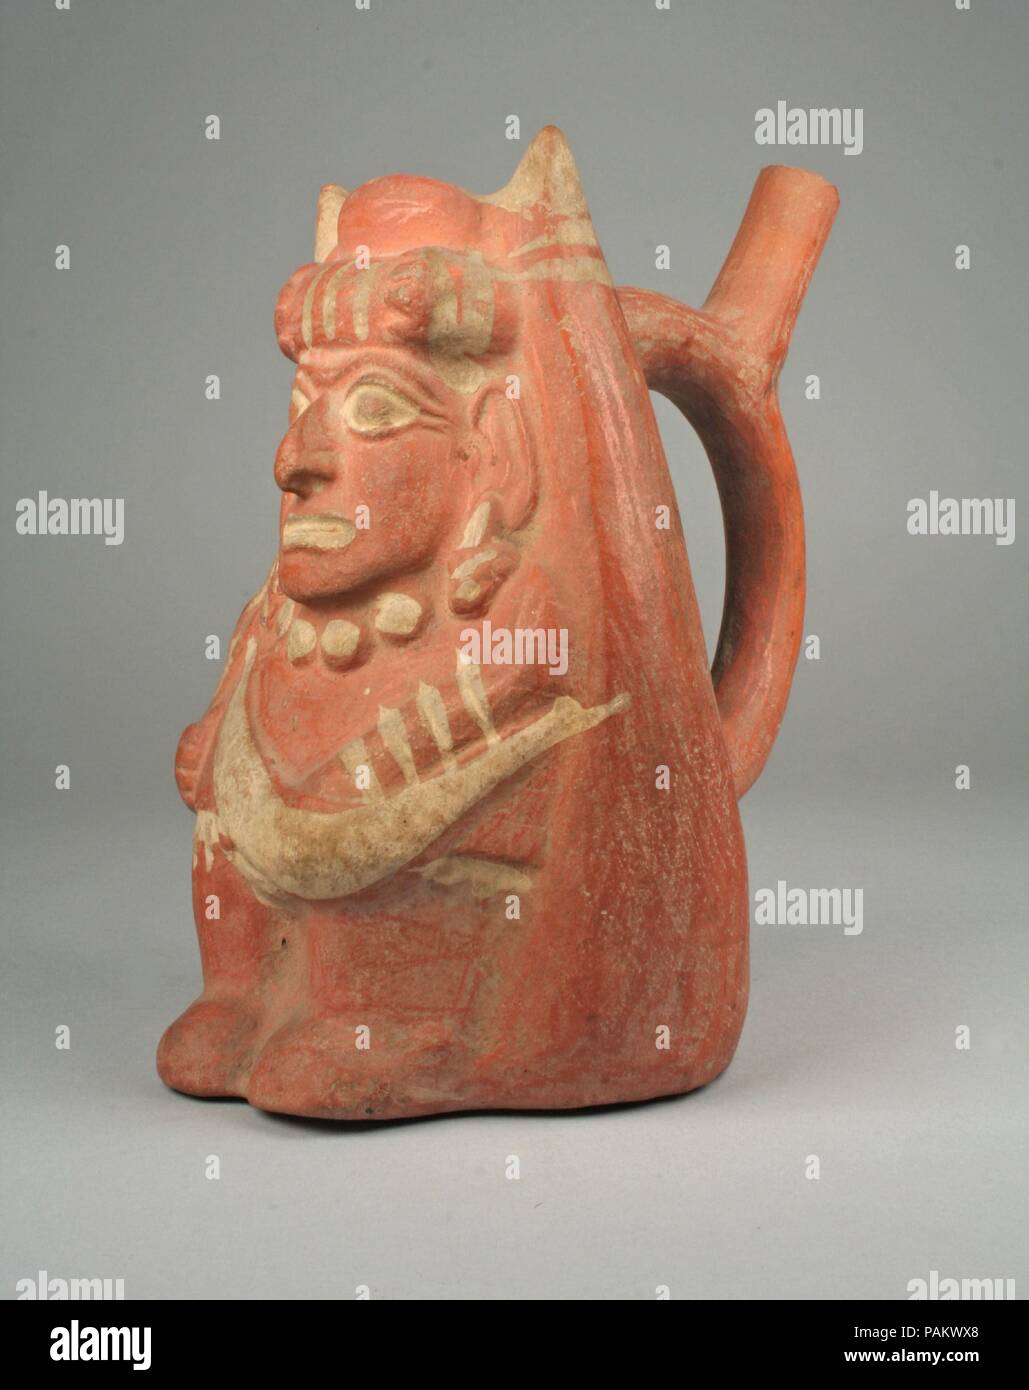 Stirrup Spout Bottle with Figure. Culture: Moche. Dimensions: H. 7 3/8 x W. 5 3/16 in. (18.7 x 13.2 cm). Date: 4th-6th century. Museum: Metropolitan Museum of Art, New York, USA. Stock Photo